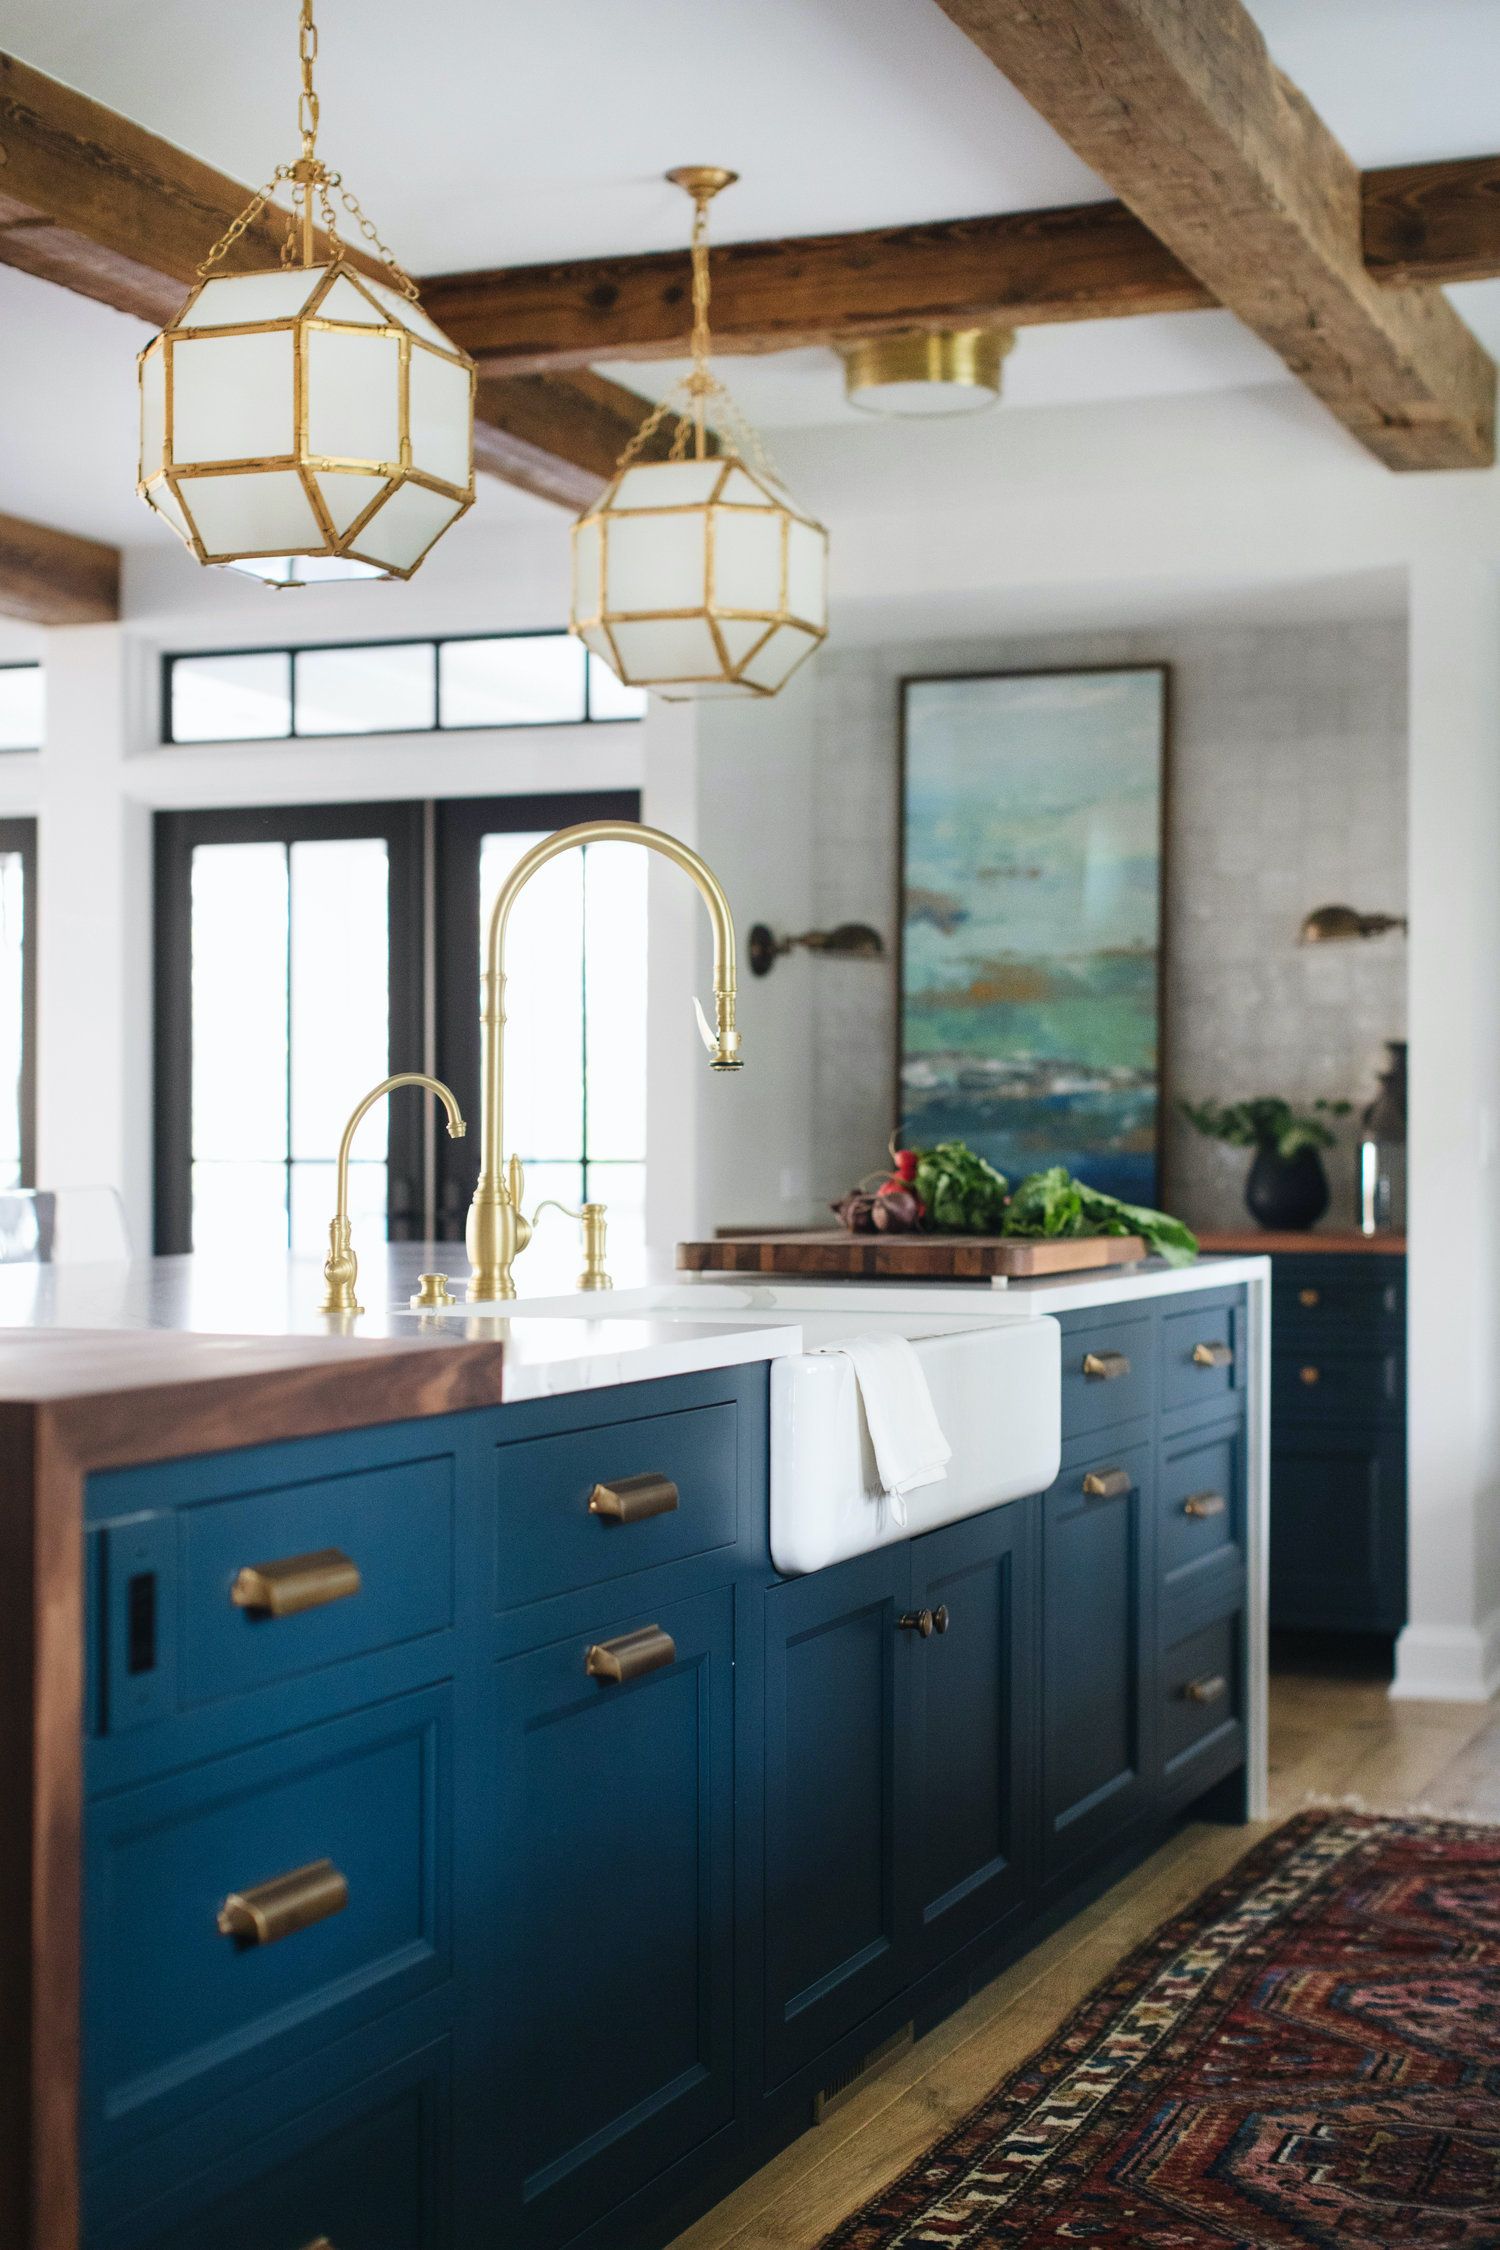 Jean Stoffer Lakeside project - classic kitchen combos